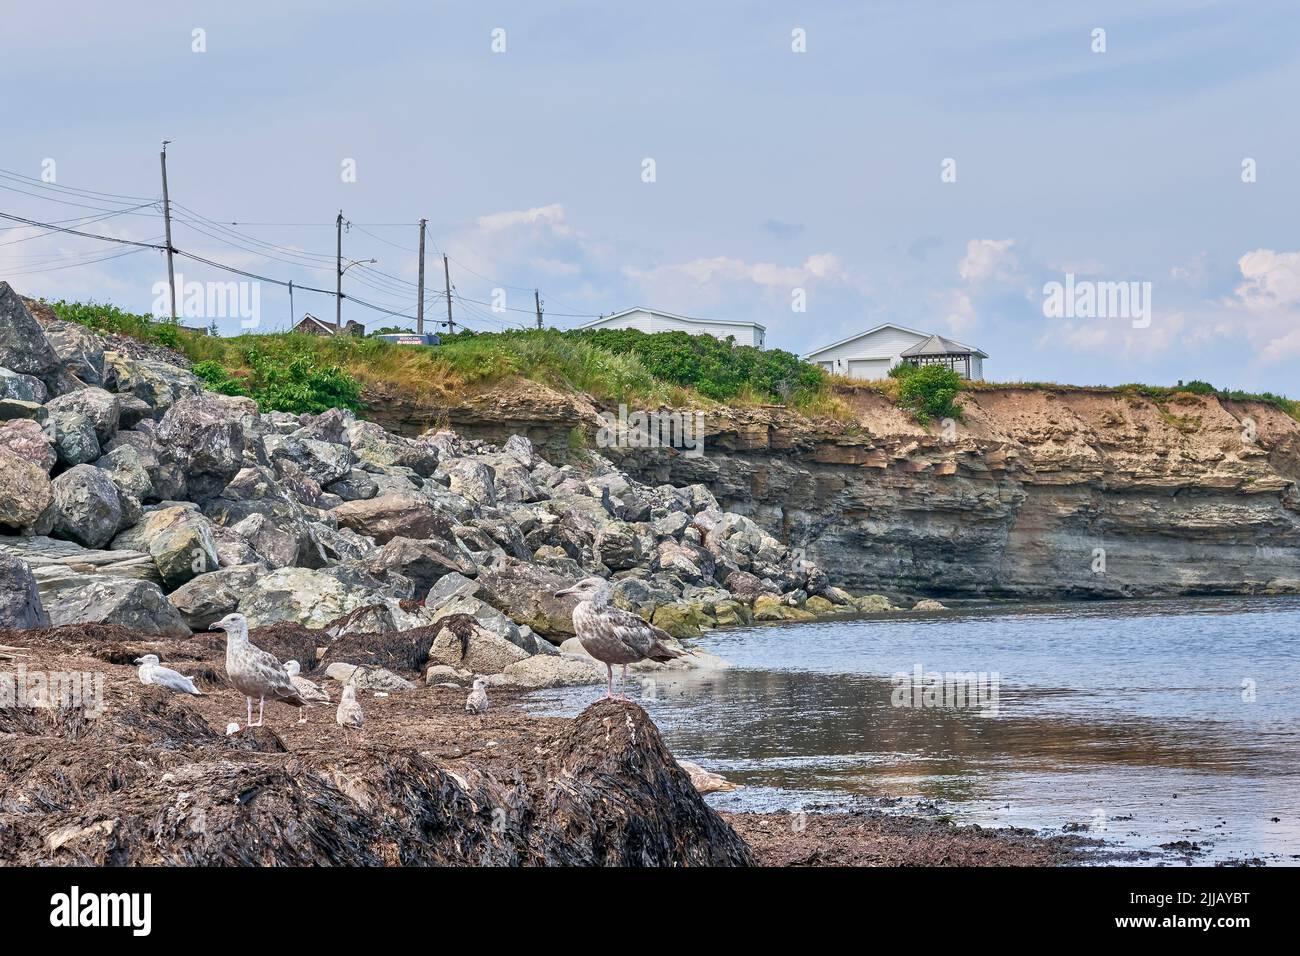 Juvenile Herring Gulls, Larus argentatus, forage on decaying seaweed in search of food on the beach at Fisherman's Park in Glace Bay Nova Scotia. Stock Photo